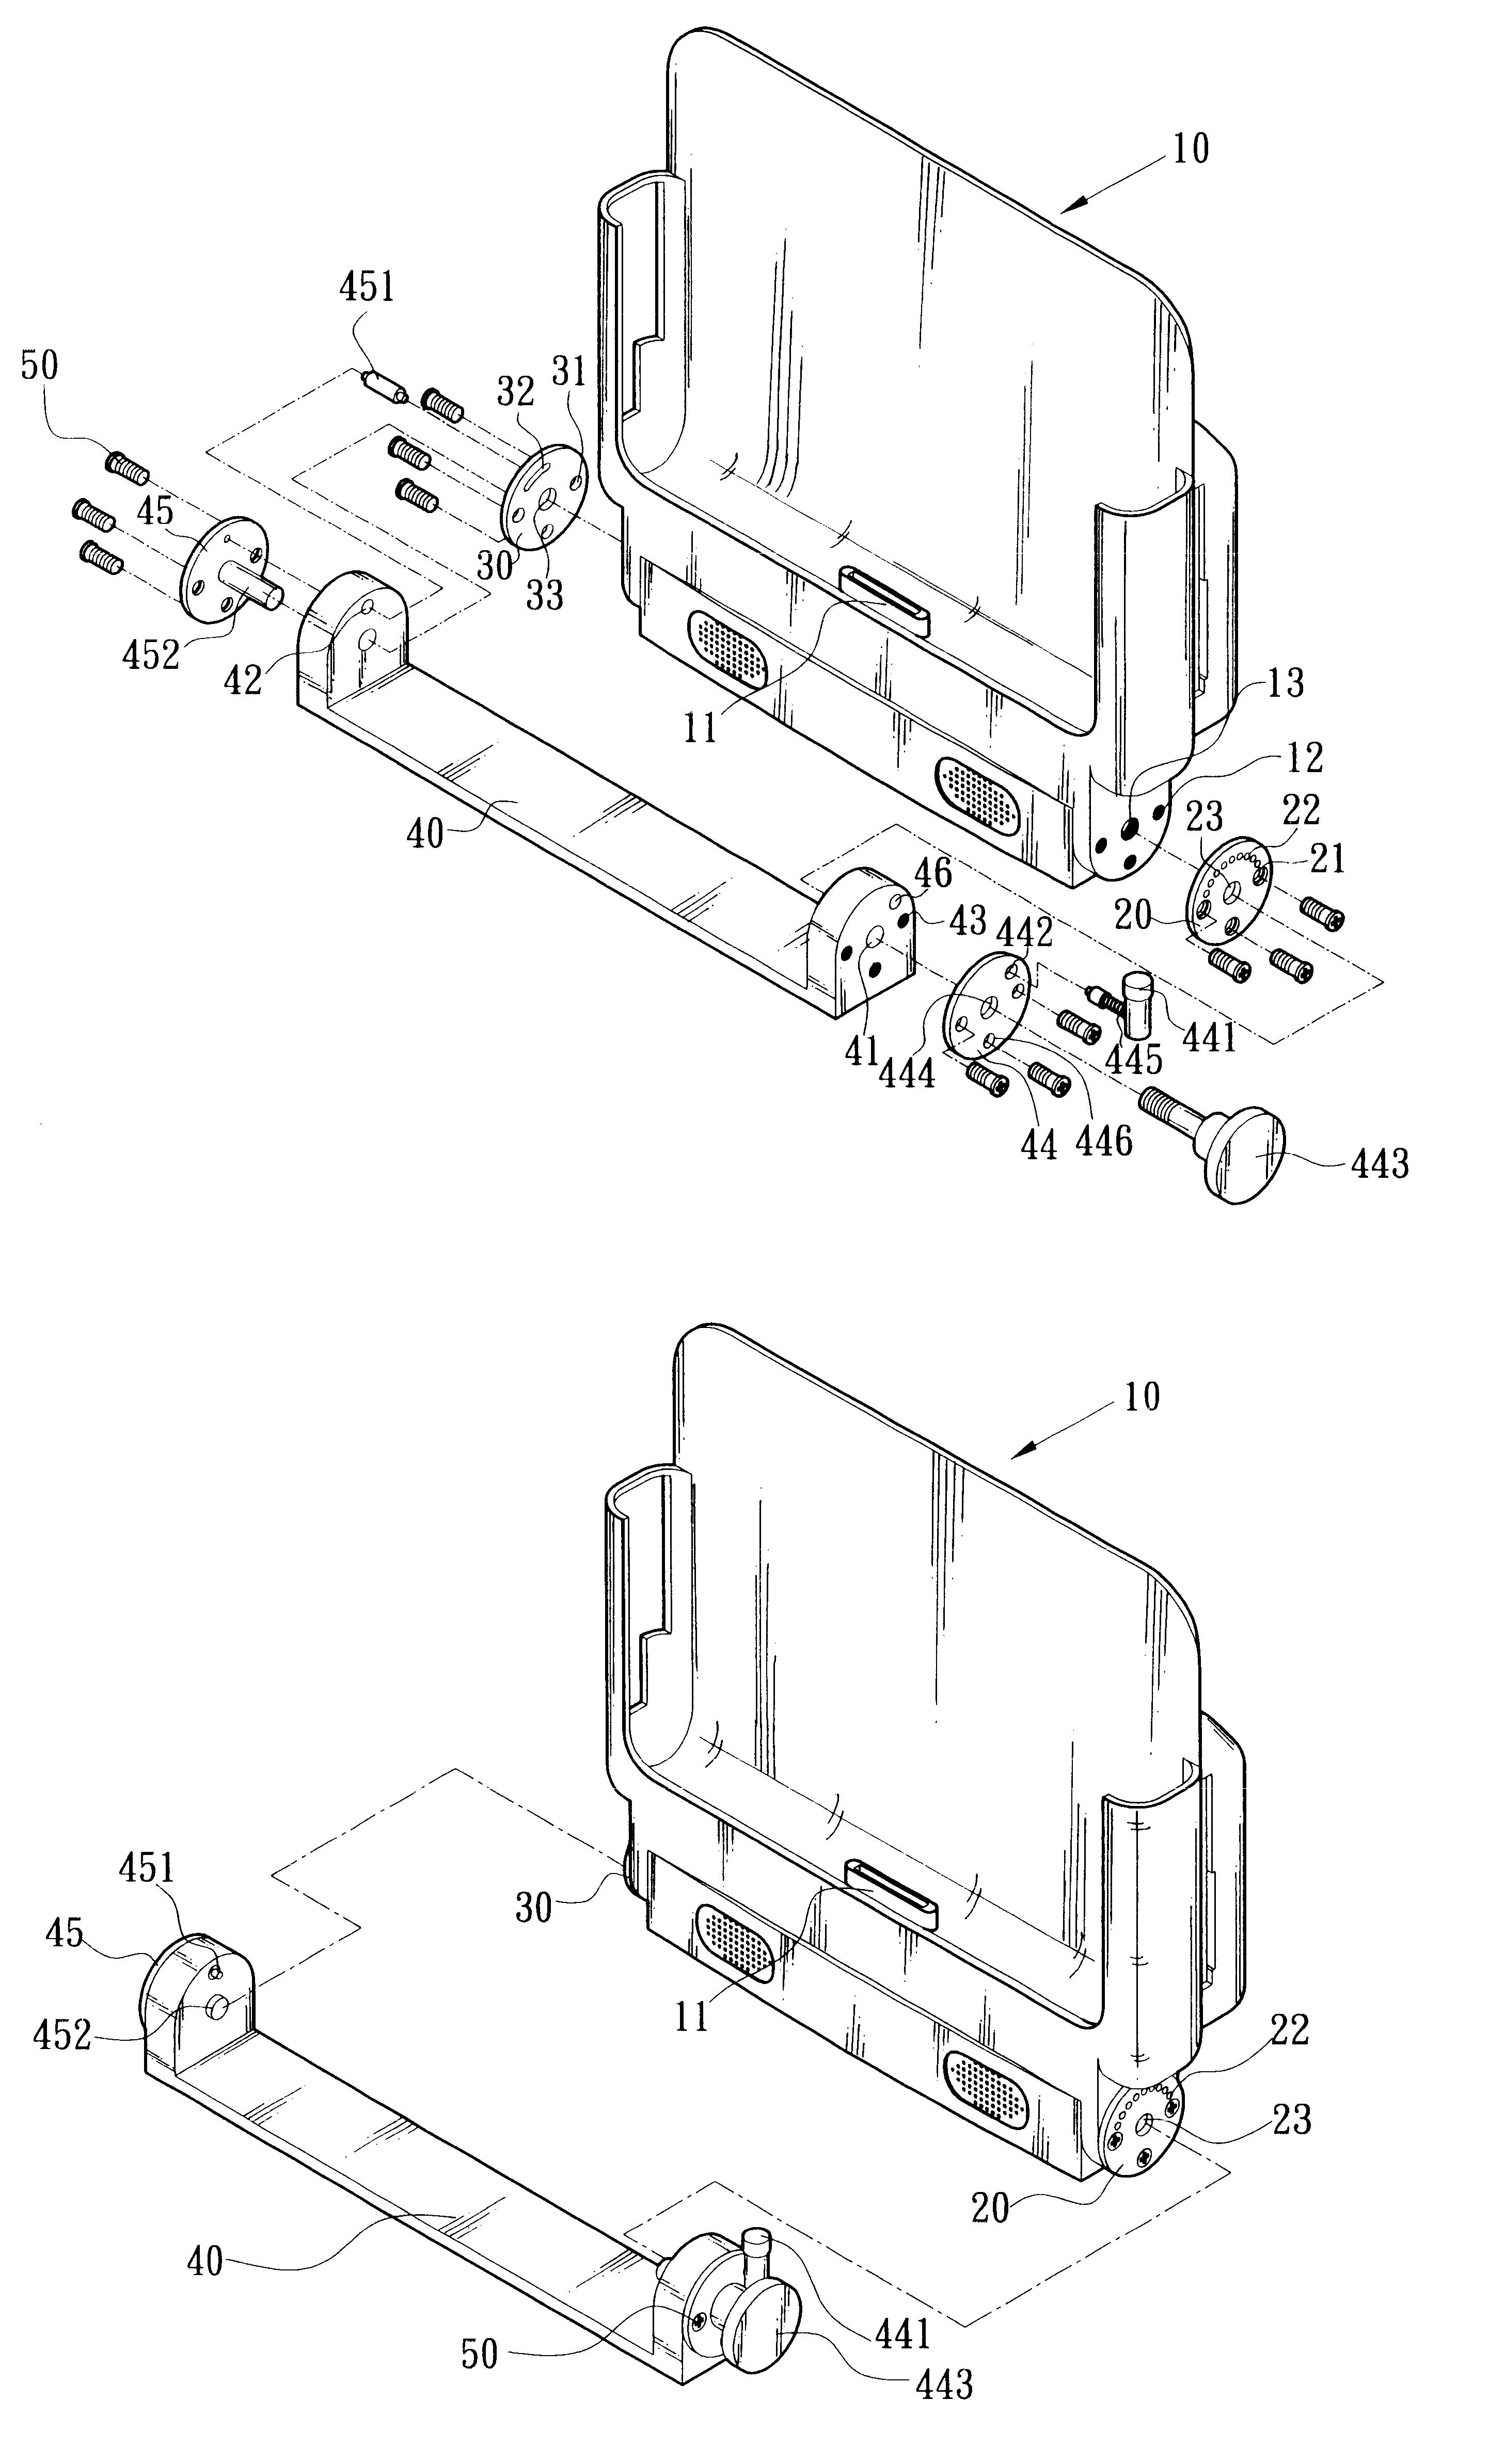 Adjustable inclined angle structure for computers